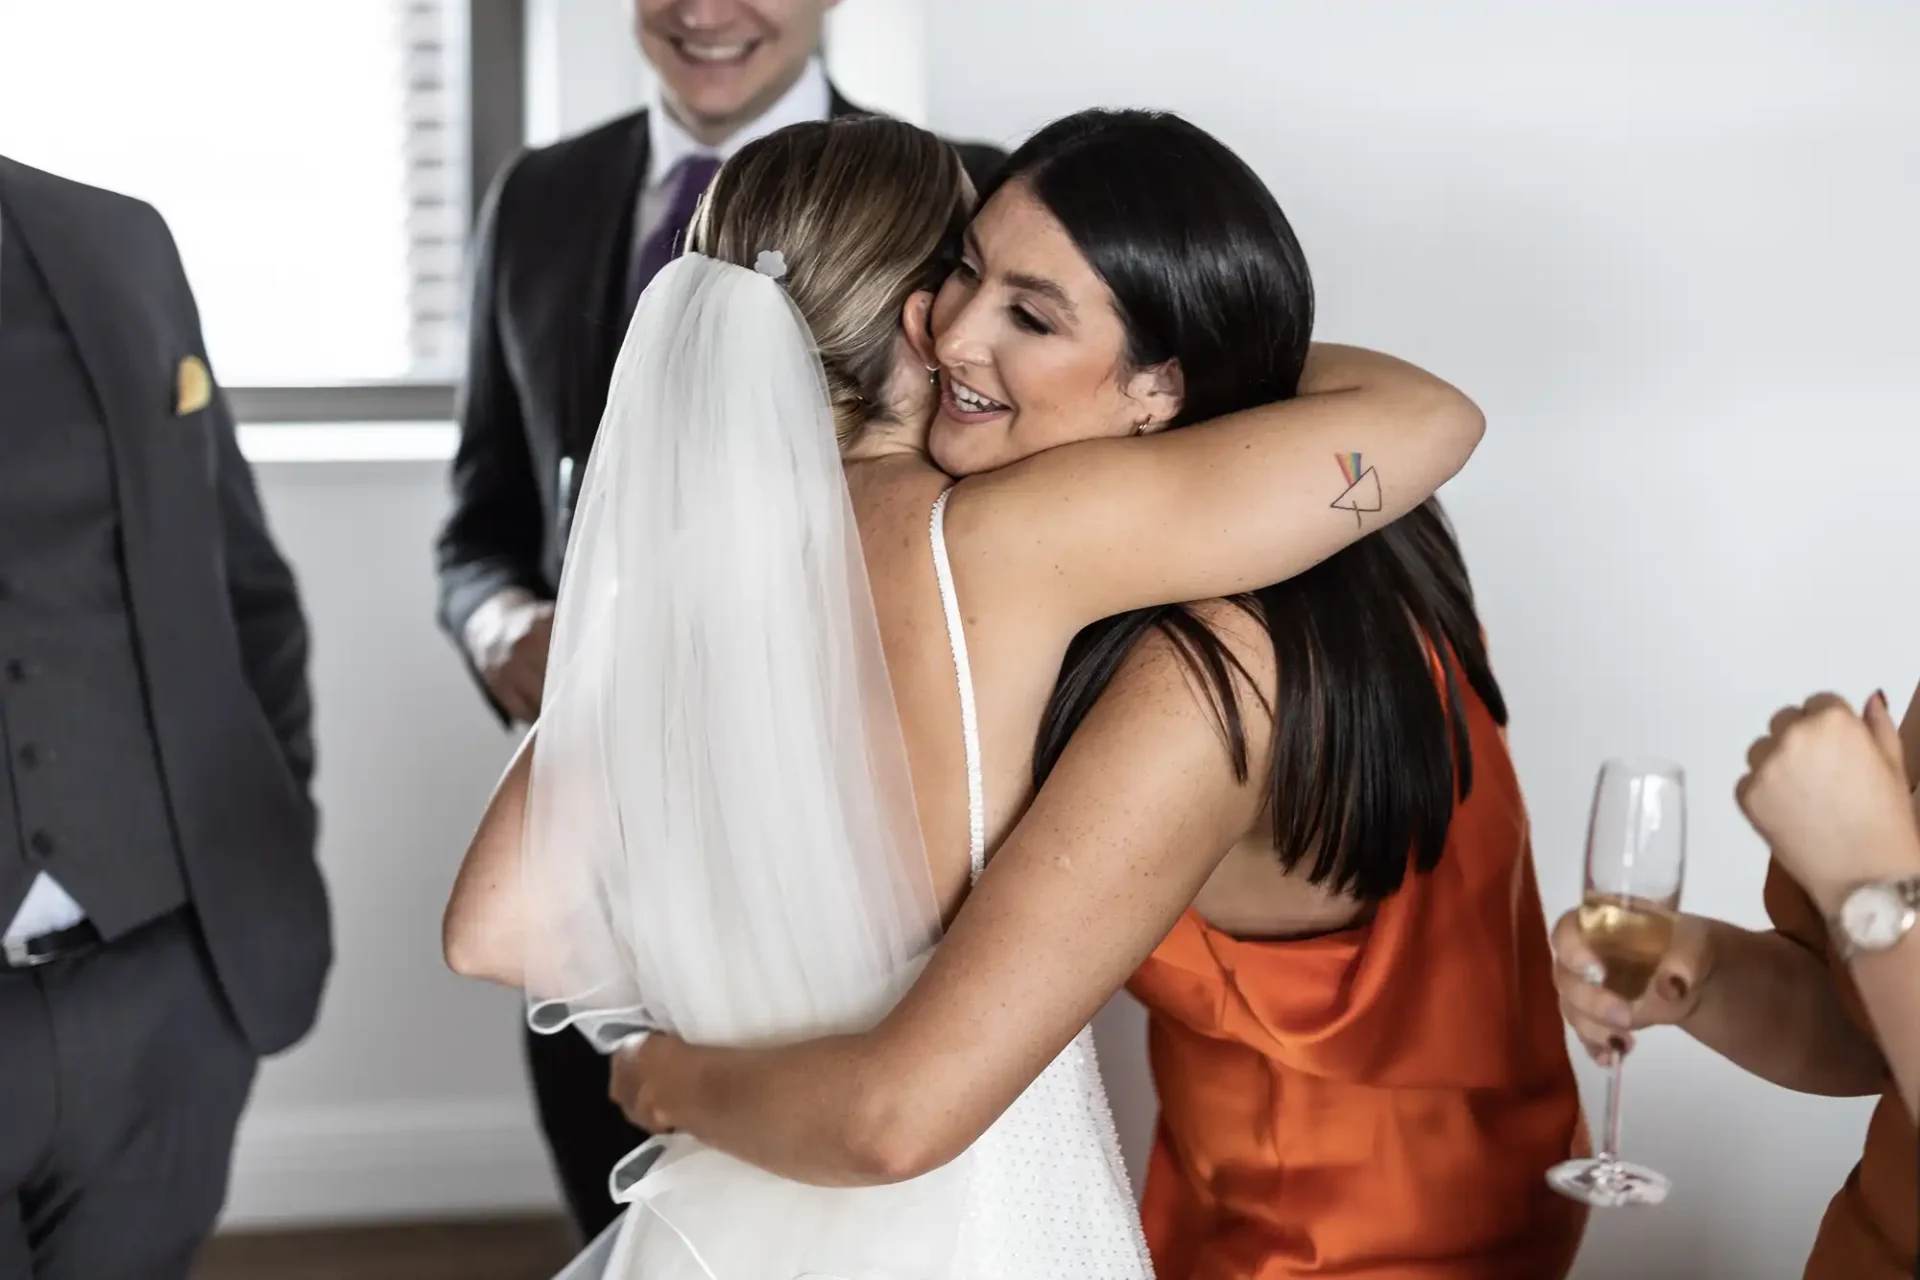 Bride in white dress embracing a woman in an orange dress at a wedding, with guests holding champagne around them.